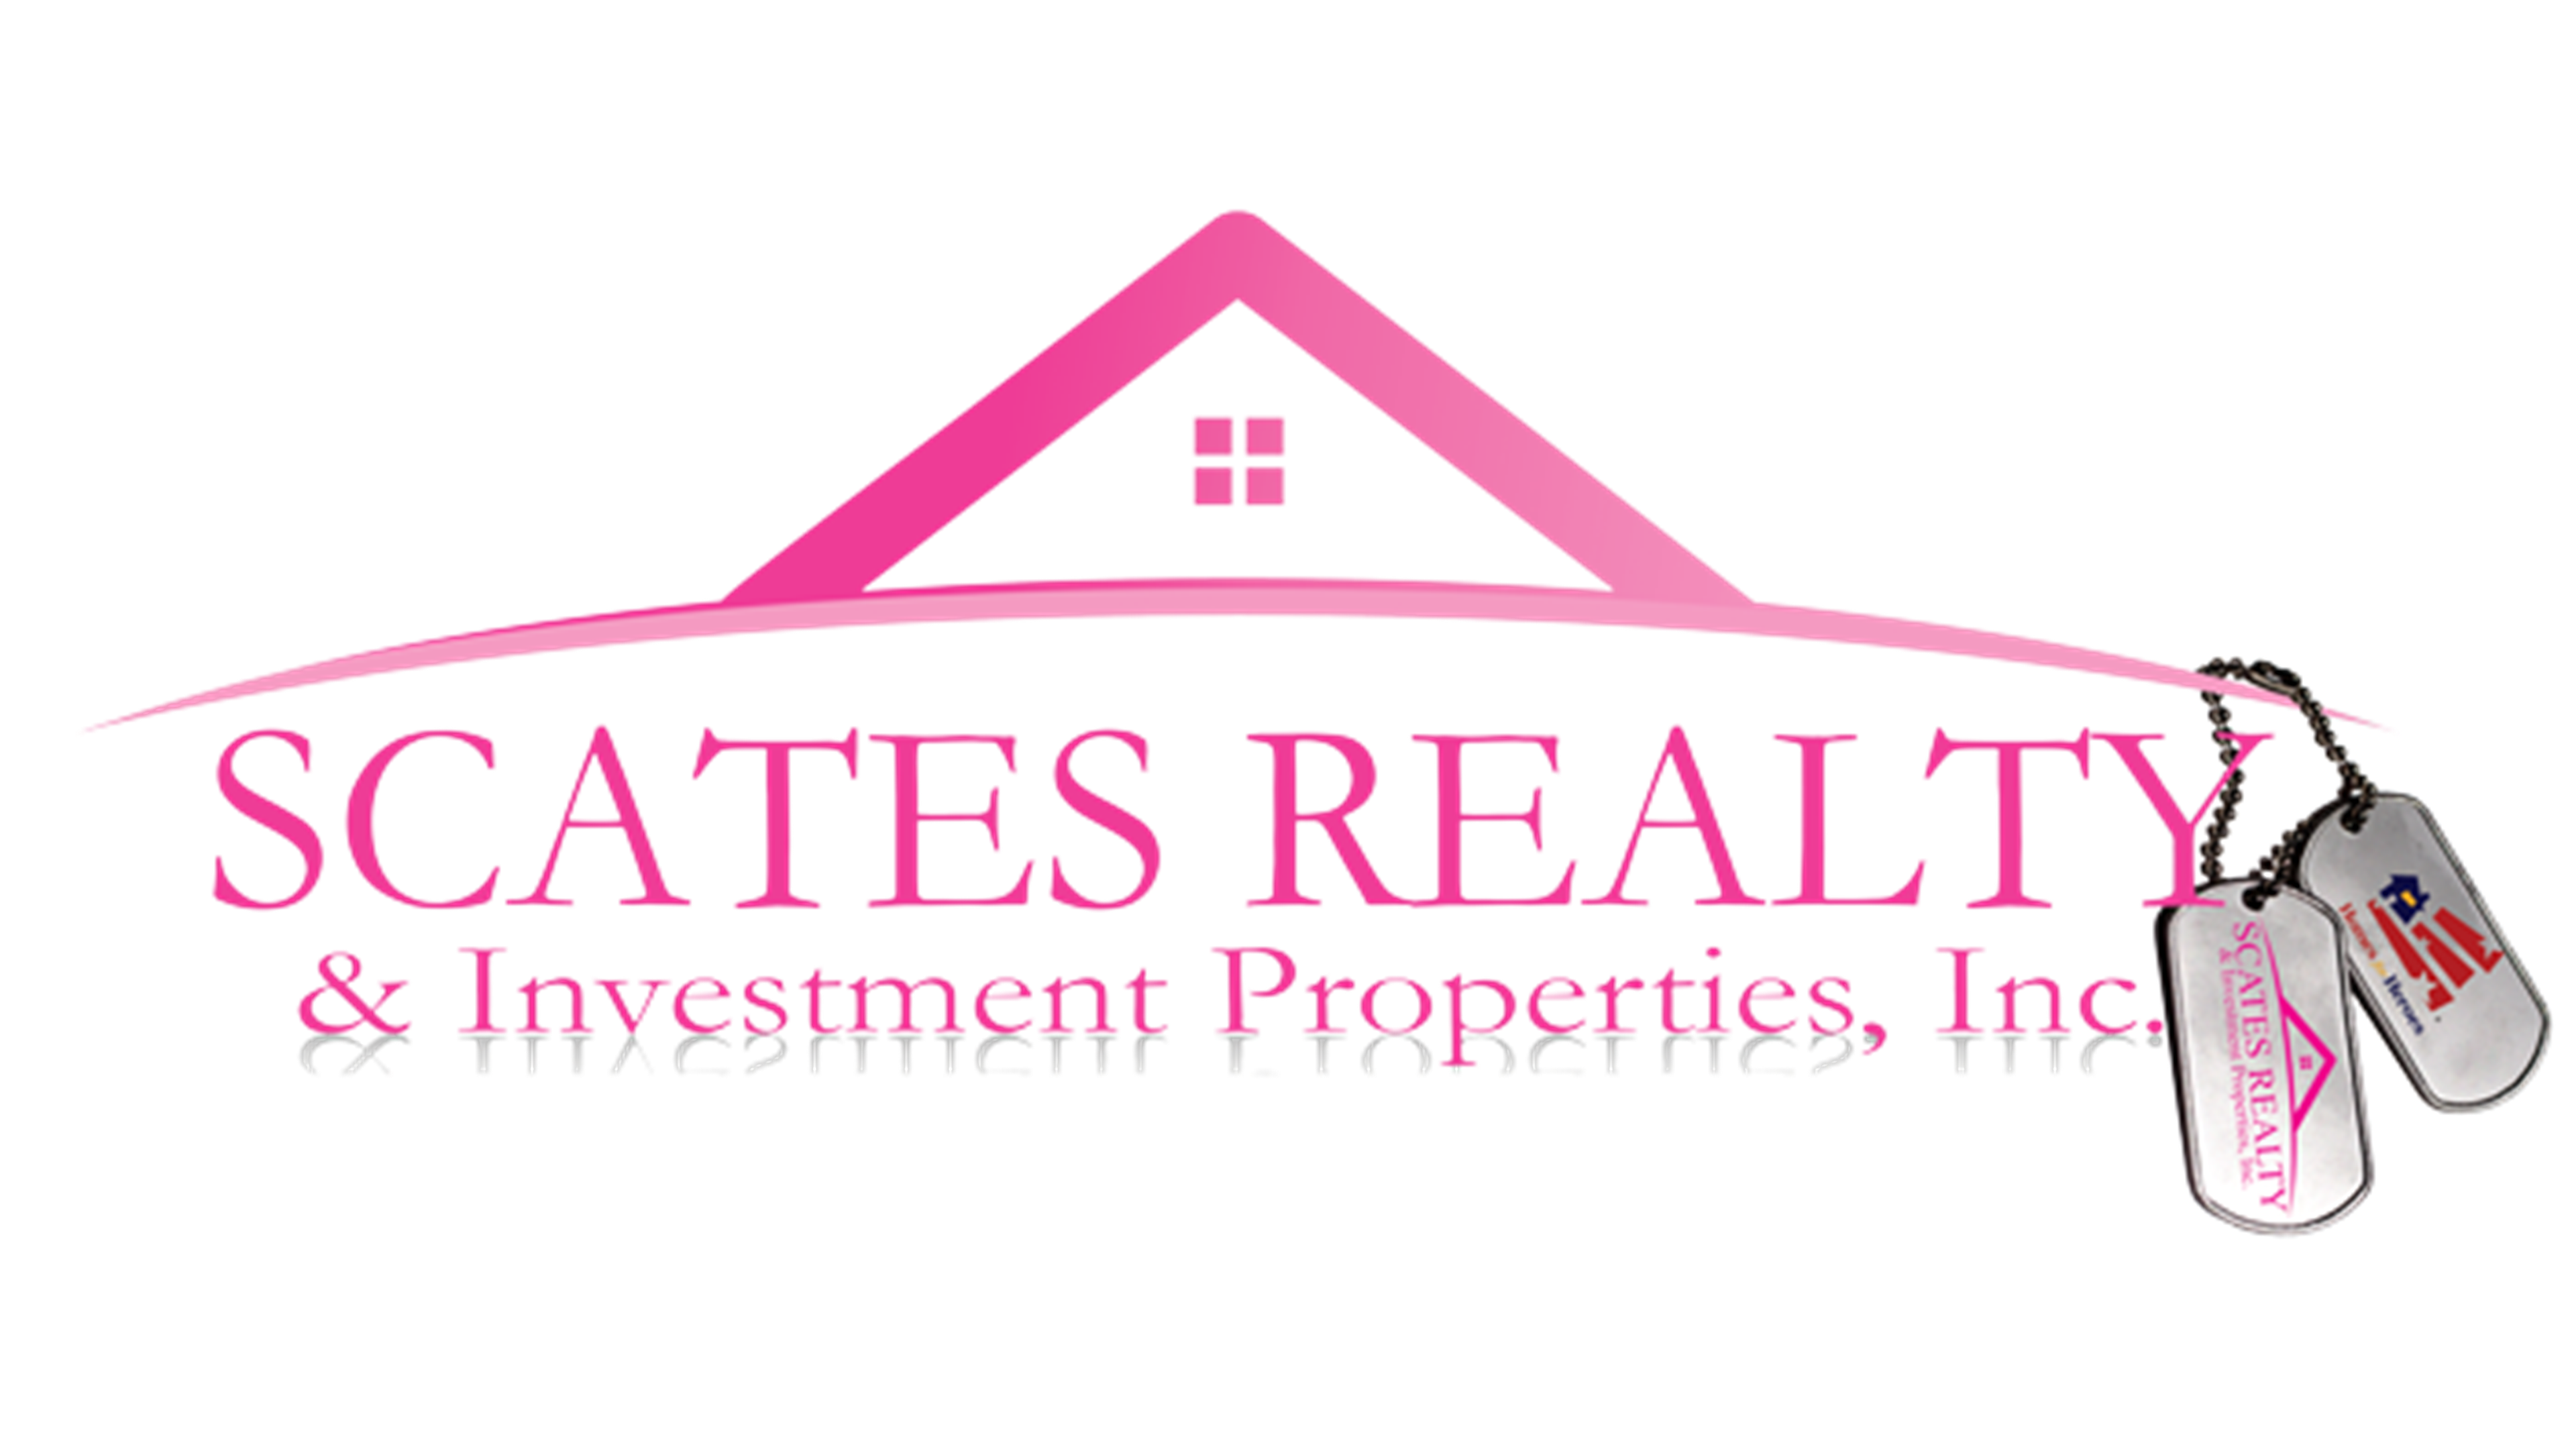 Lisa Pownall - Scates Realty & Investment Properties INC Logo